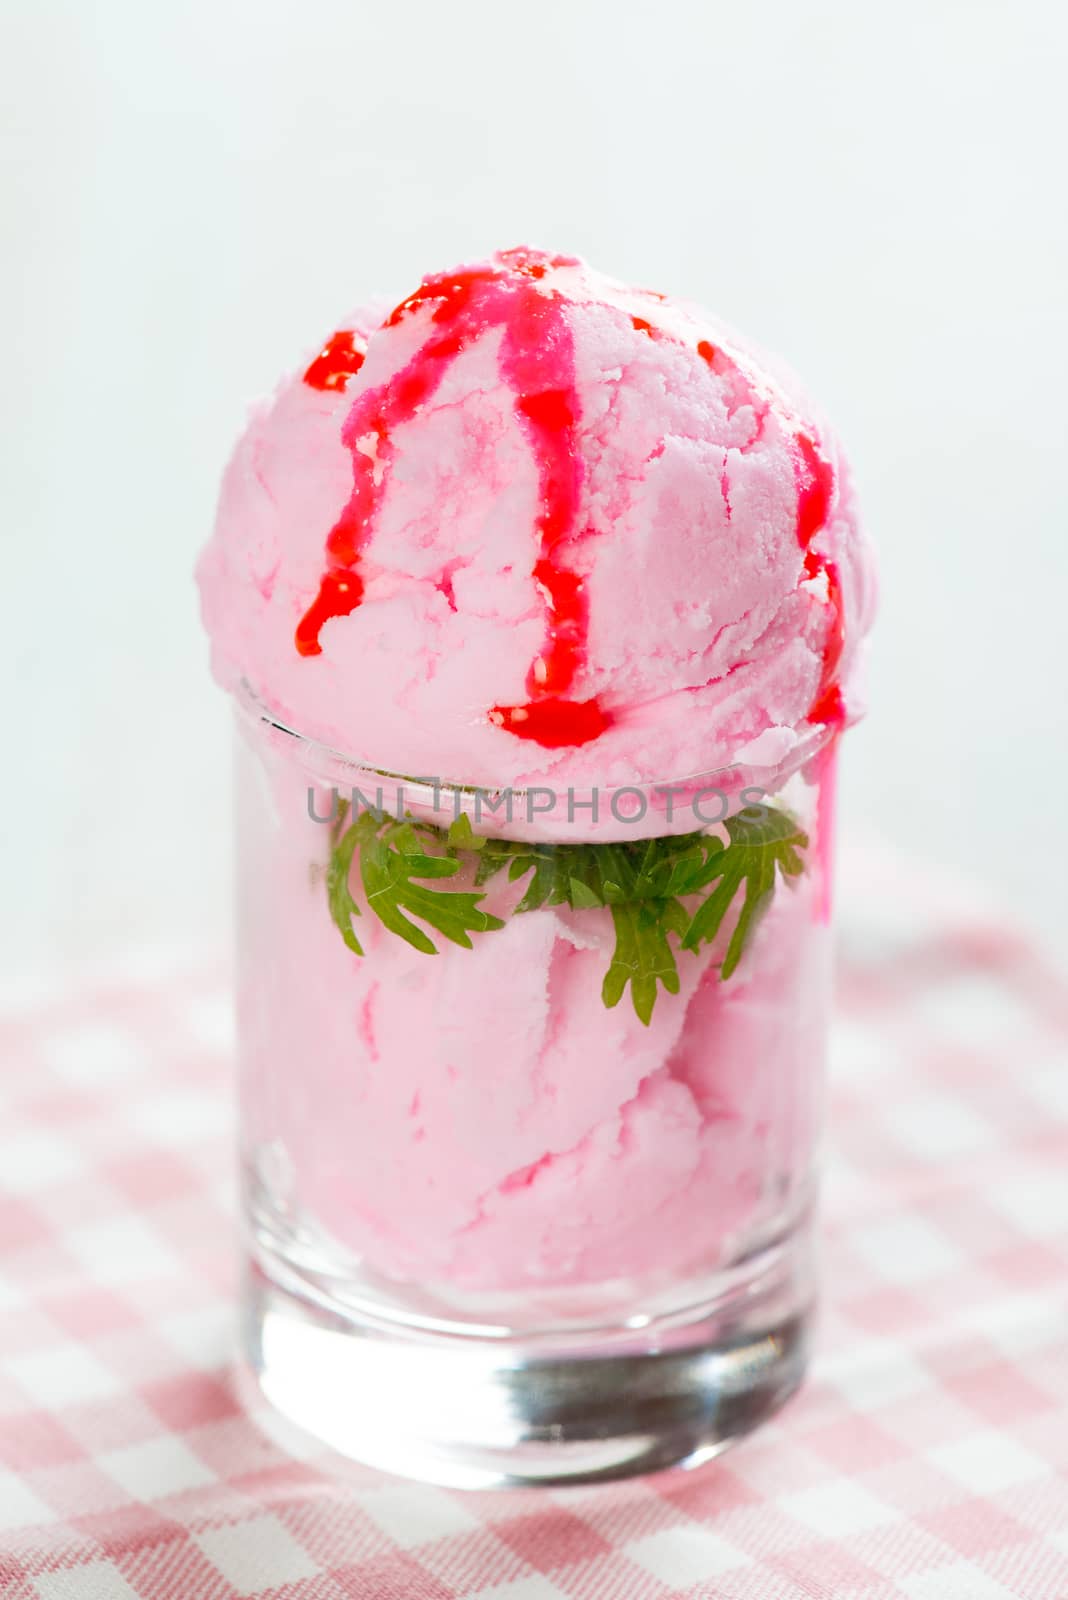 Strawberry ice cream in cup by szefei